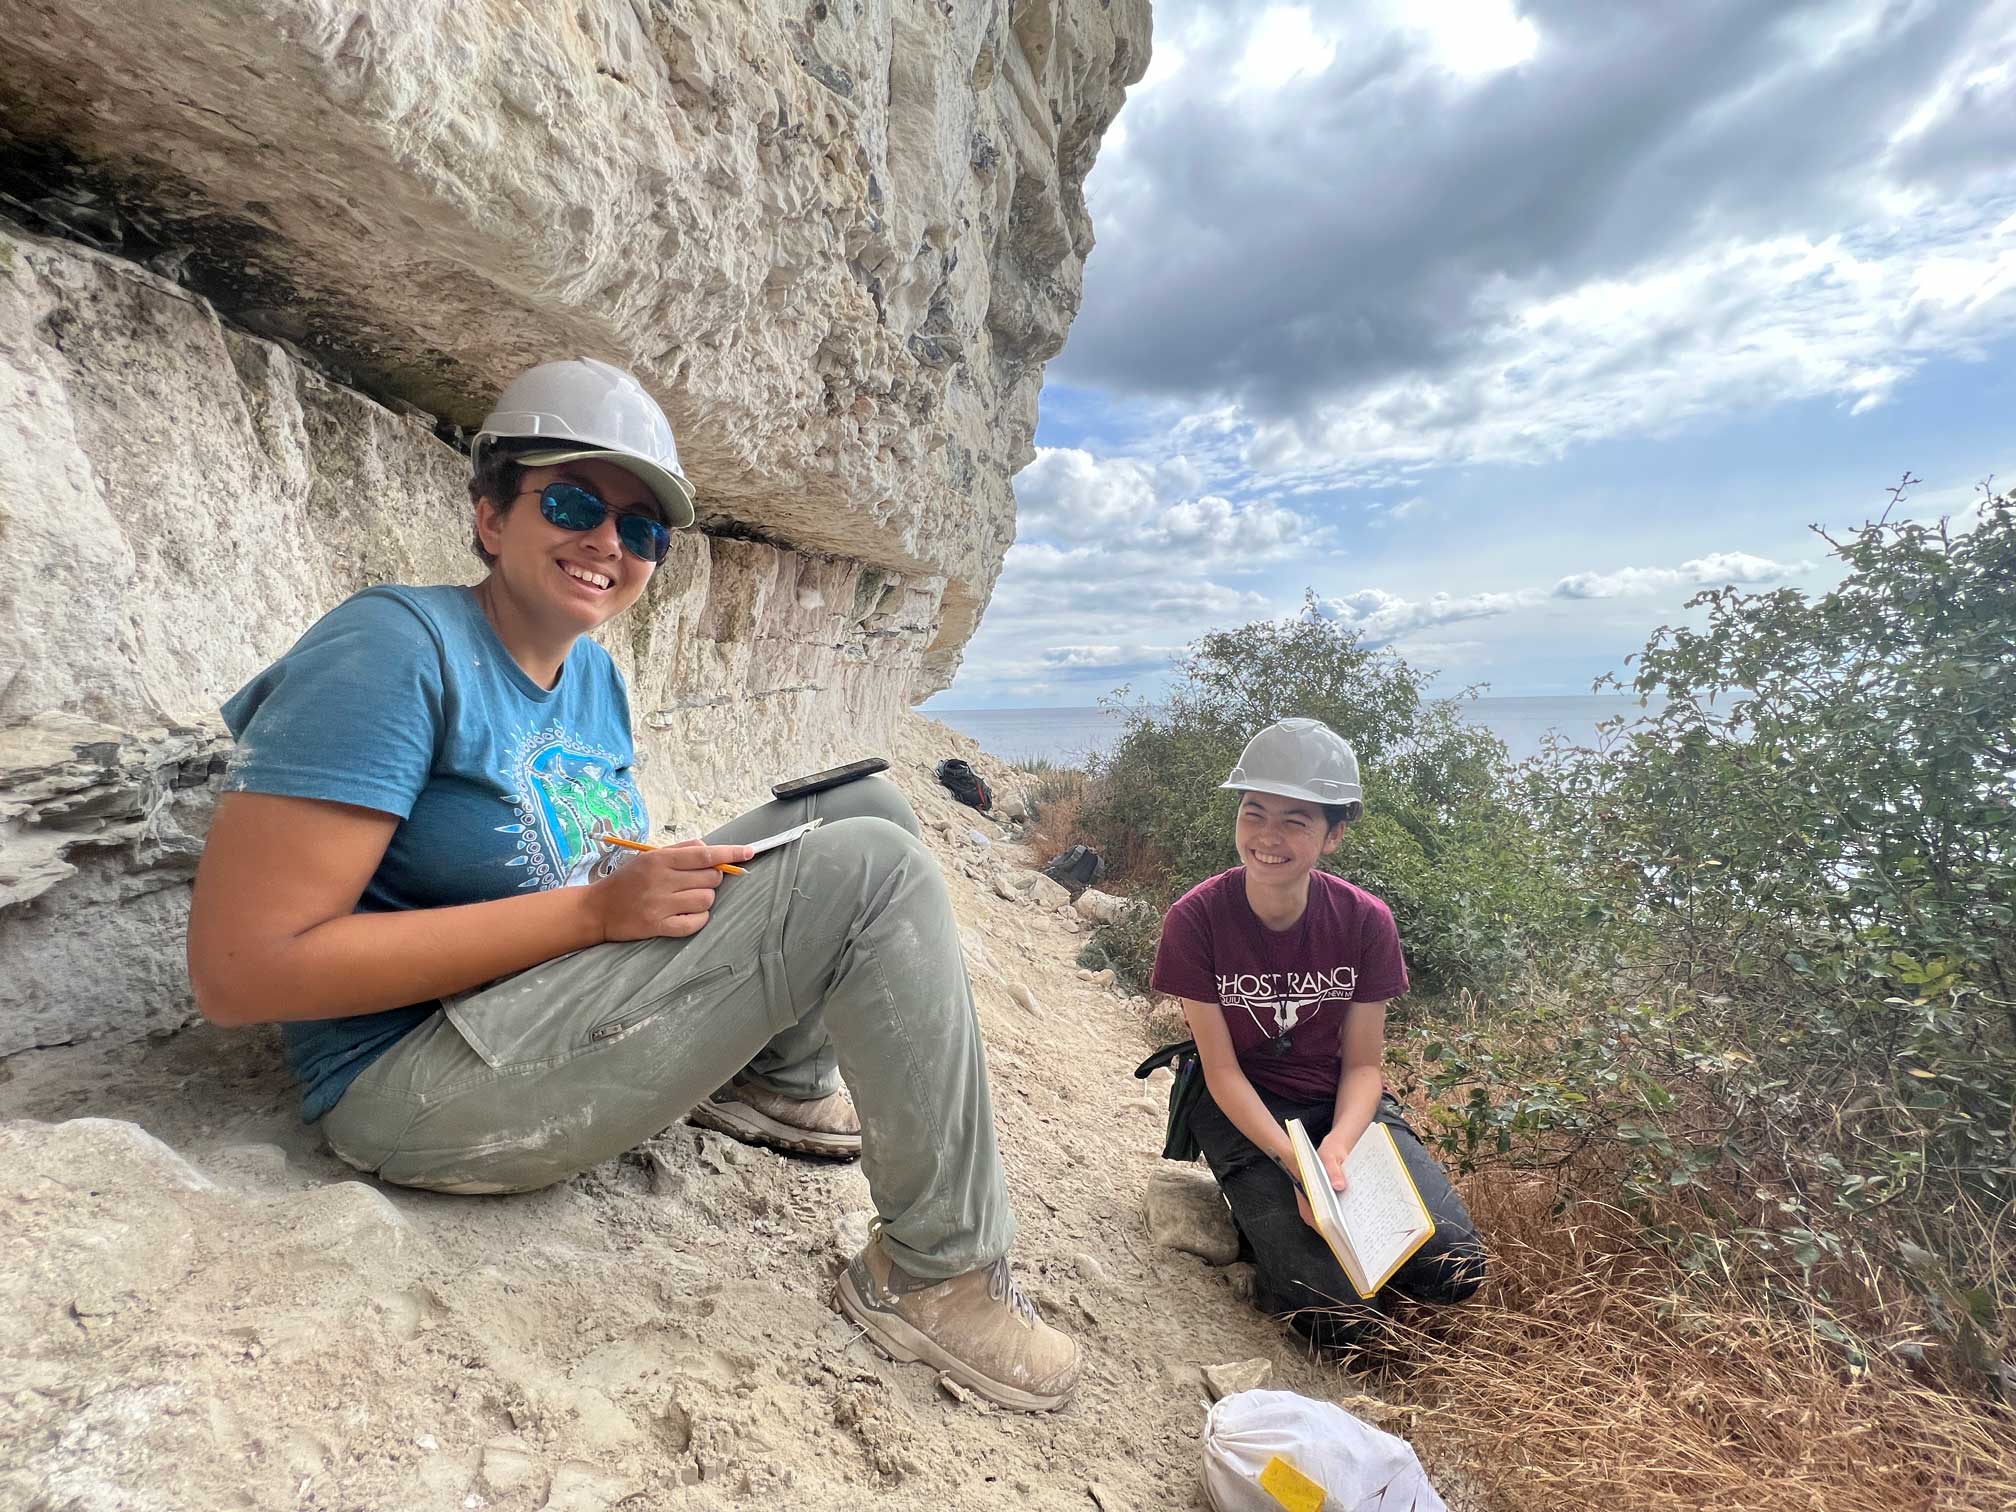 Maya is on the left, sitting on some rock formations against a cliff. She is wearing a hard hat, sunglasses, looking at the camera, holding a pencil with a notebook on her lap. Leah is on the right smiling looking at Maya. She is kneeling against the ground holding an open notebook.